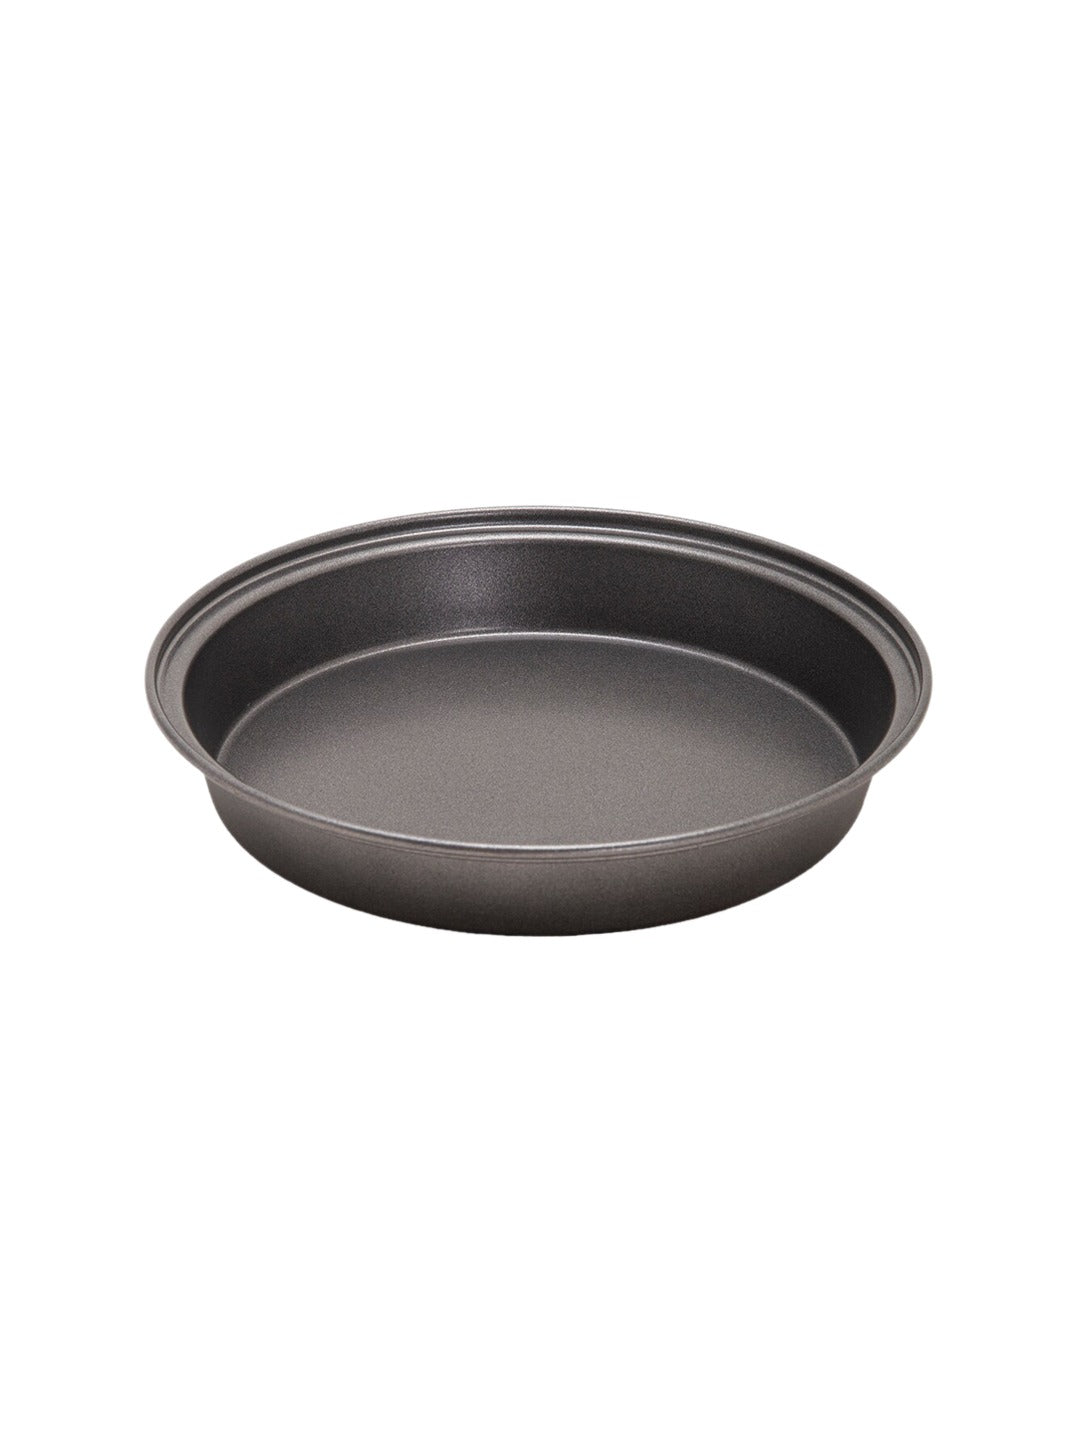 DHB26 Stainless Steel Cake Pan By Stories